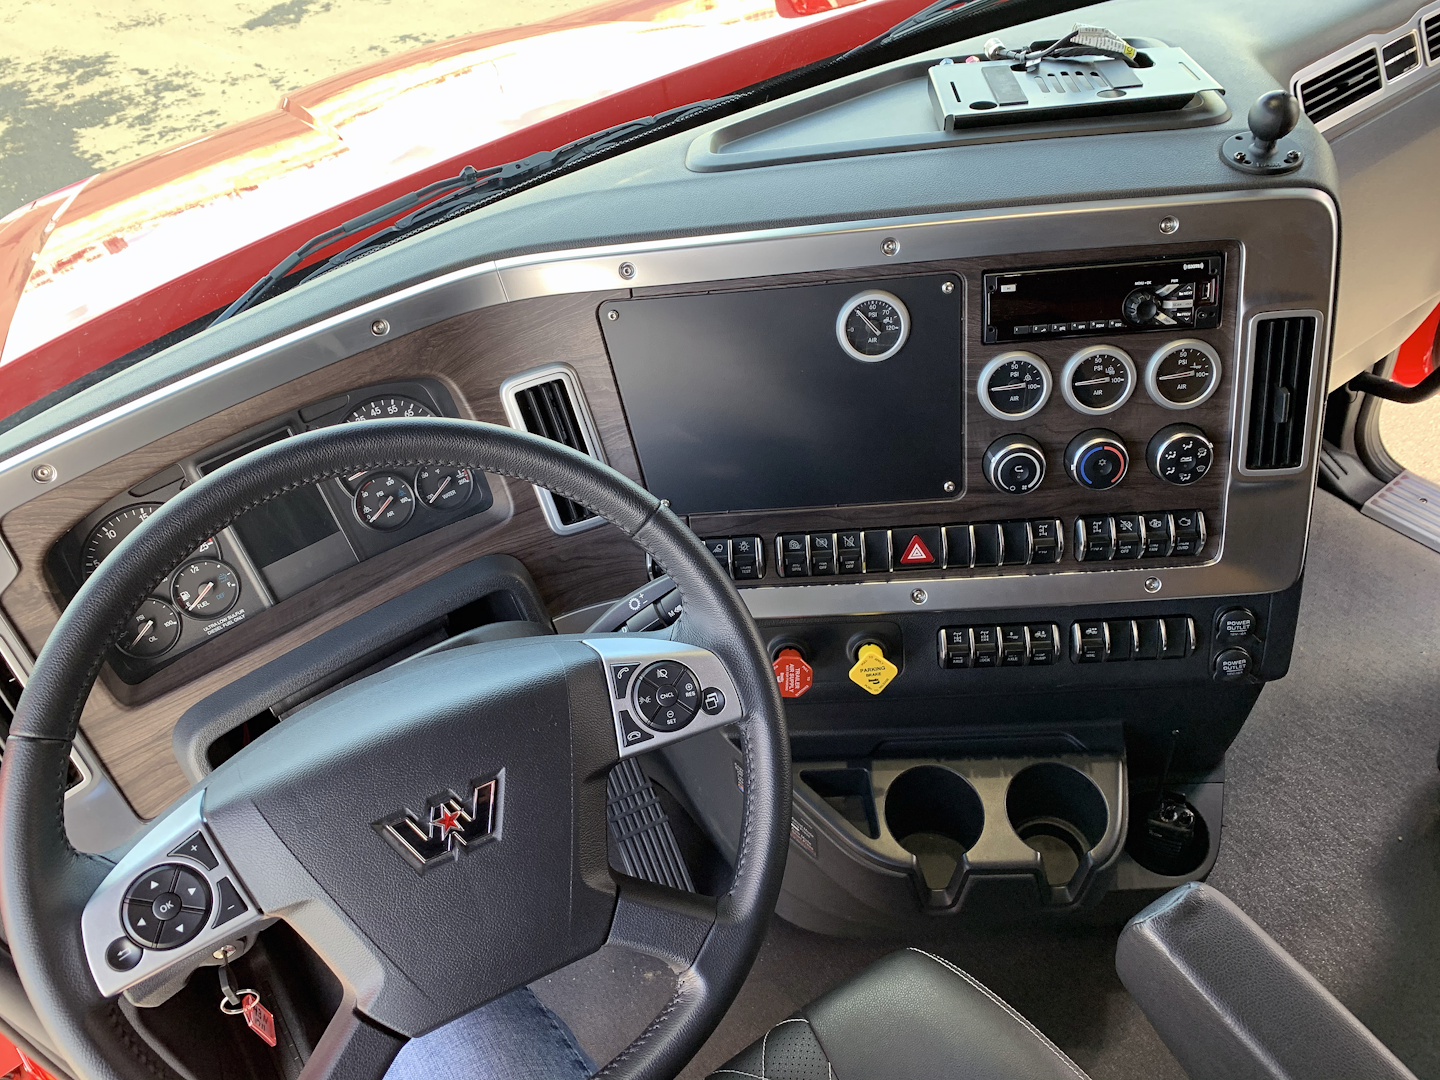 The 49X’s dash is pulled forward and wings around the driver’s right, a fairly common long-haul design feature that allows operators to keep their hands on the wheel and eyes on the road.